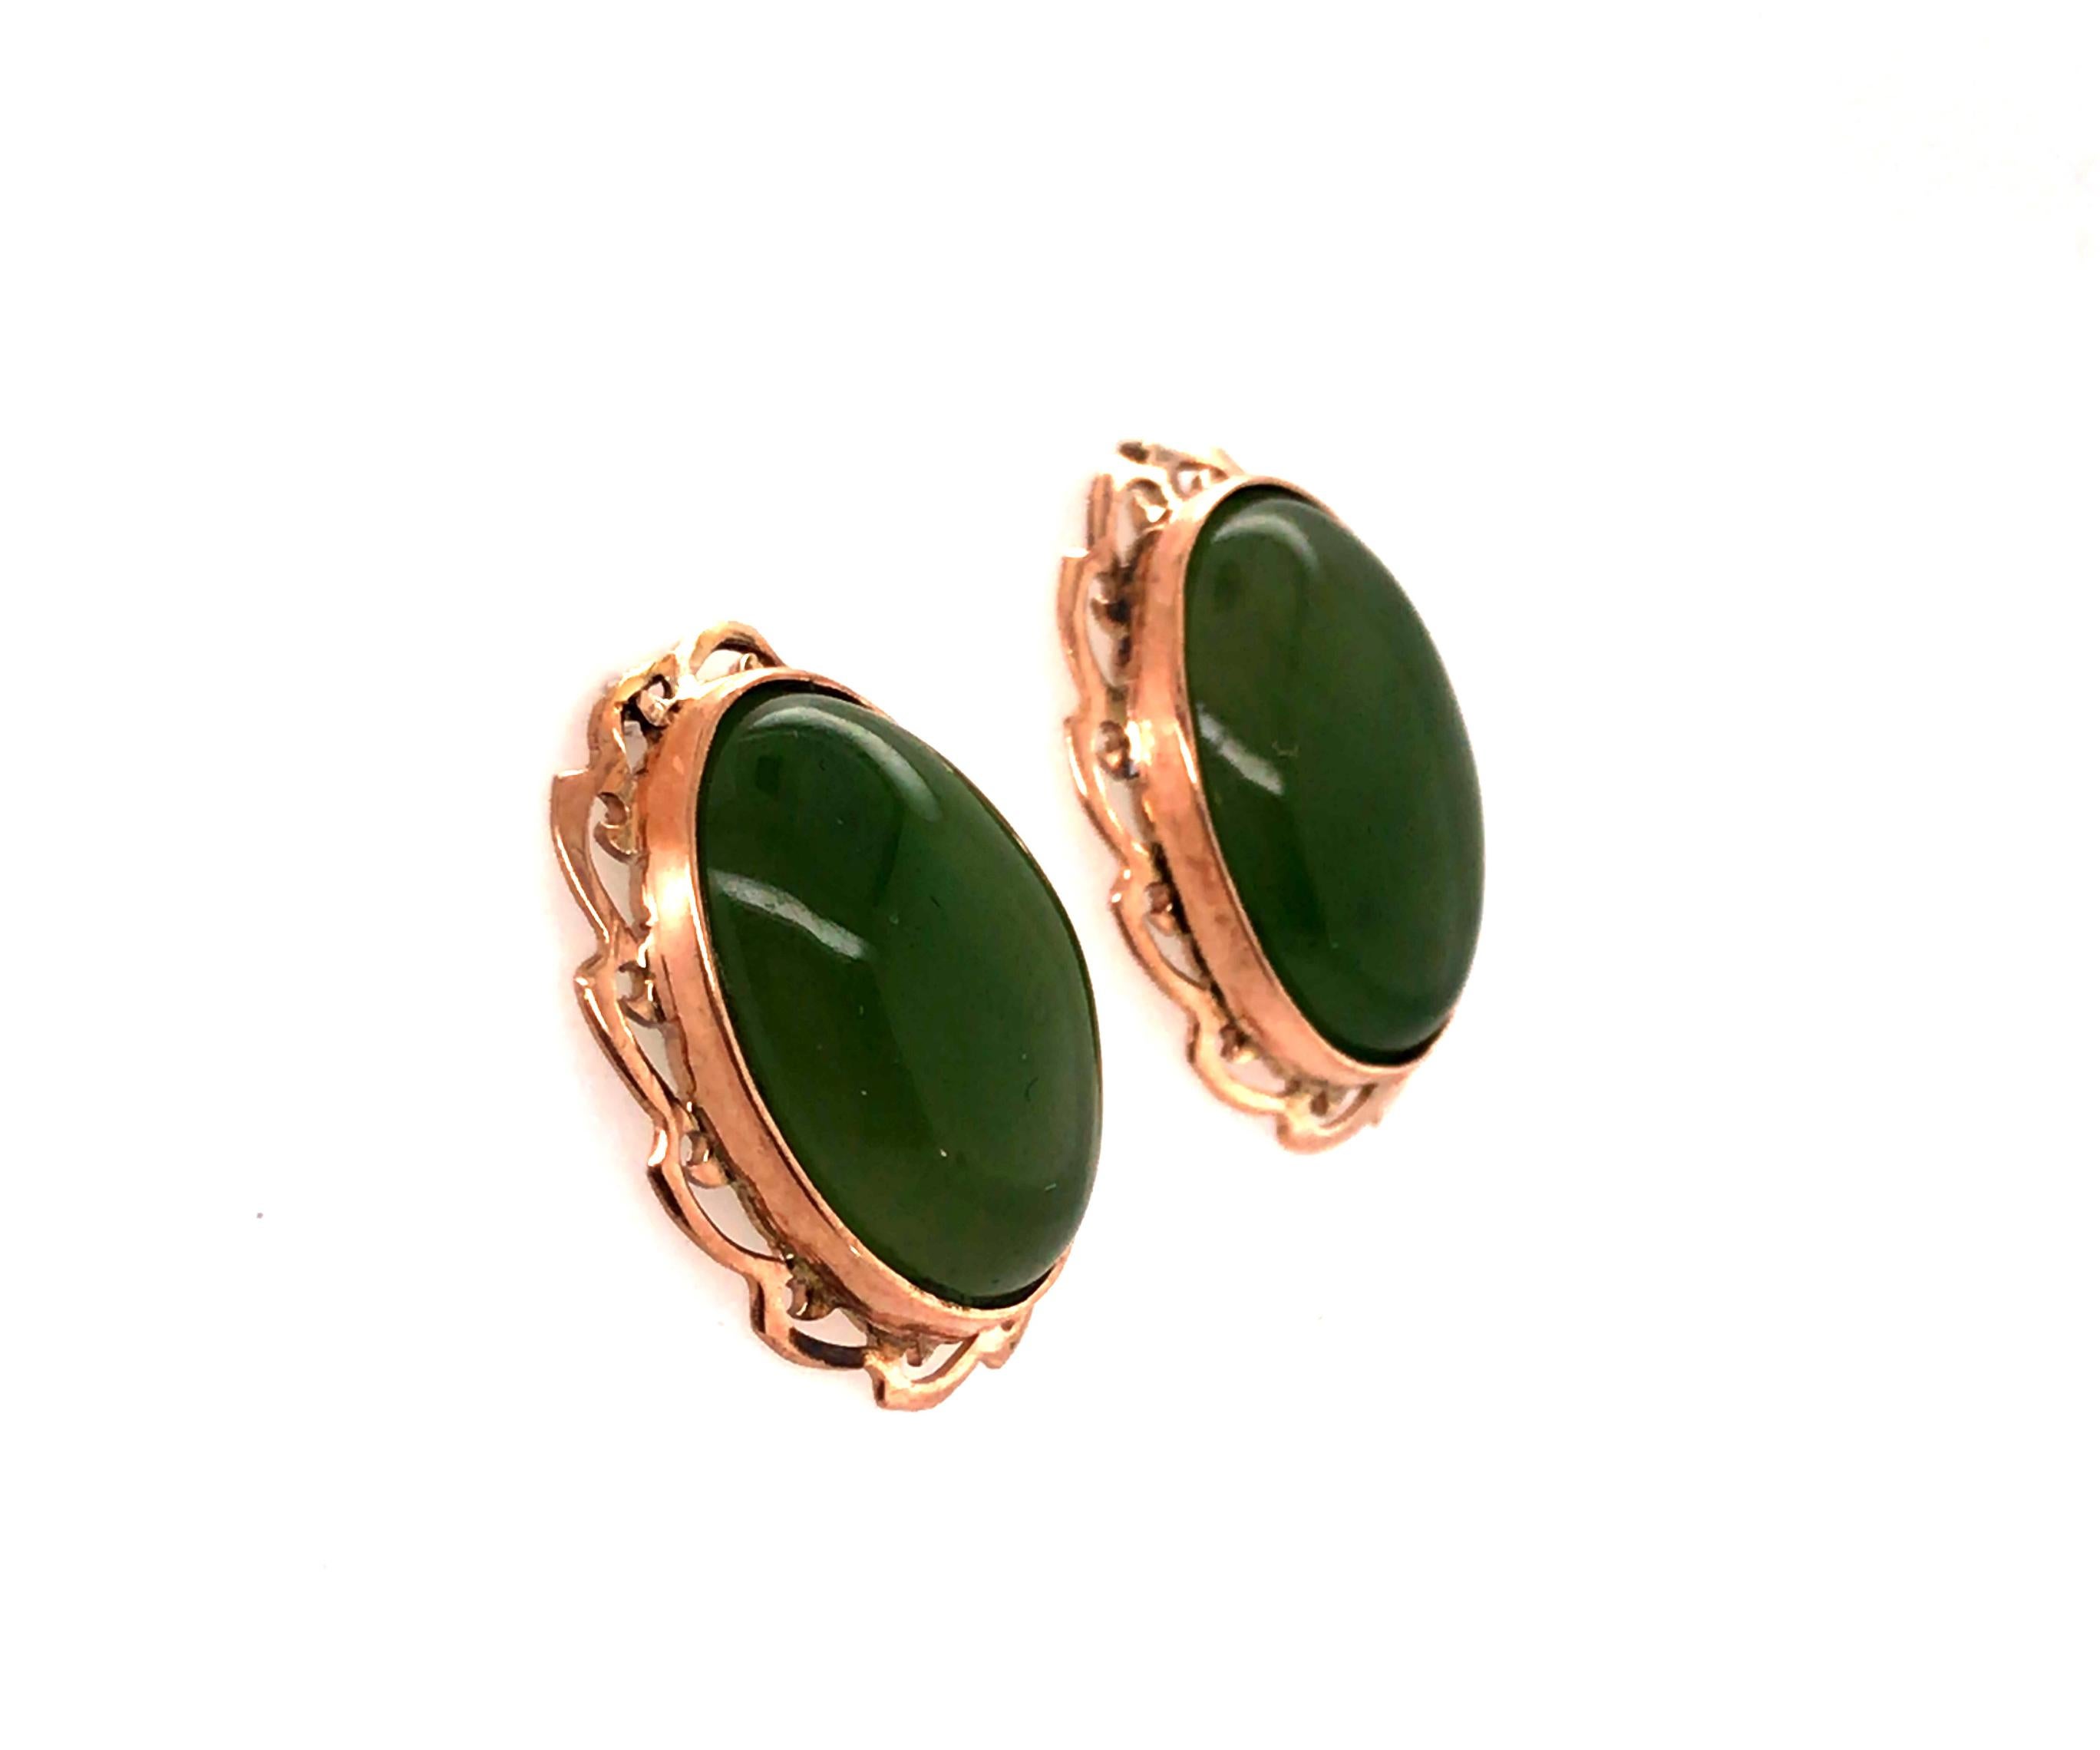 Vintage Jade Cabochon Stud Earrings 14K Yellow Gold Retro Mid Century Antique In Excellent Condition For Sale In Dearborn, MI